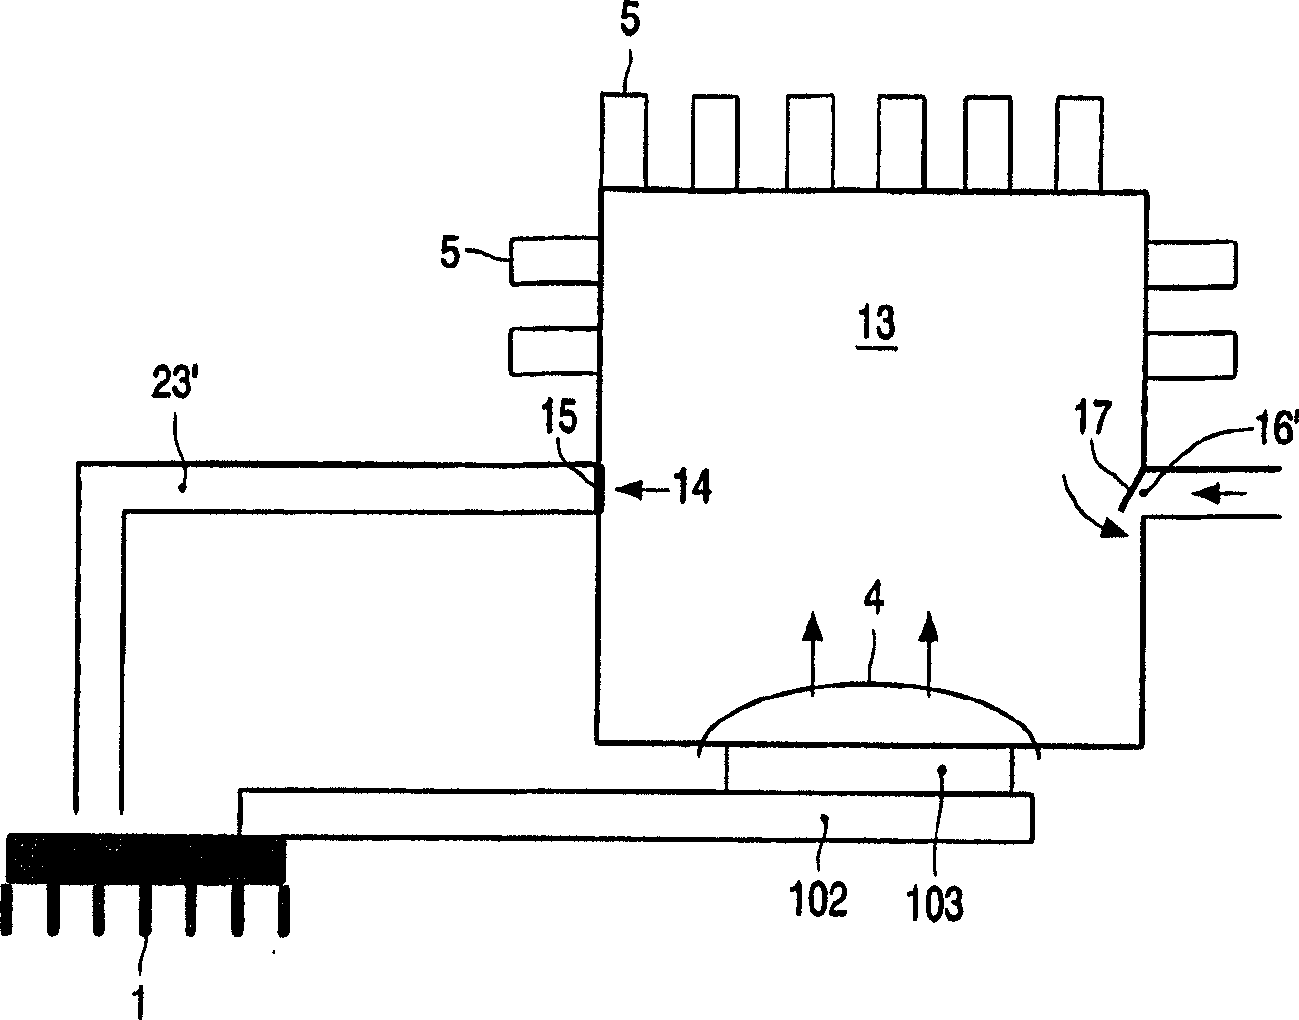 Method and system for cooling at least one electronic device